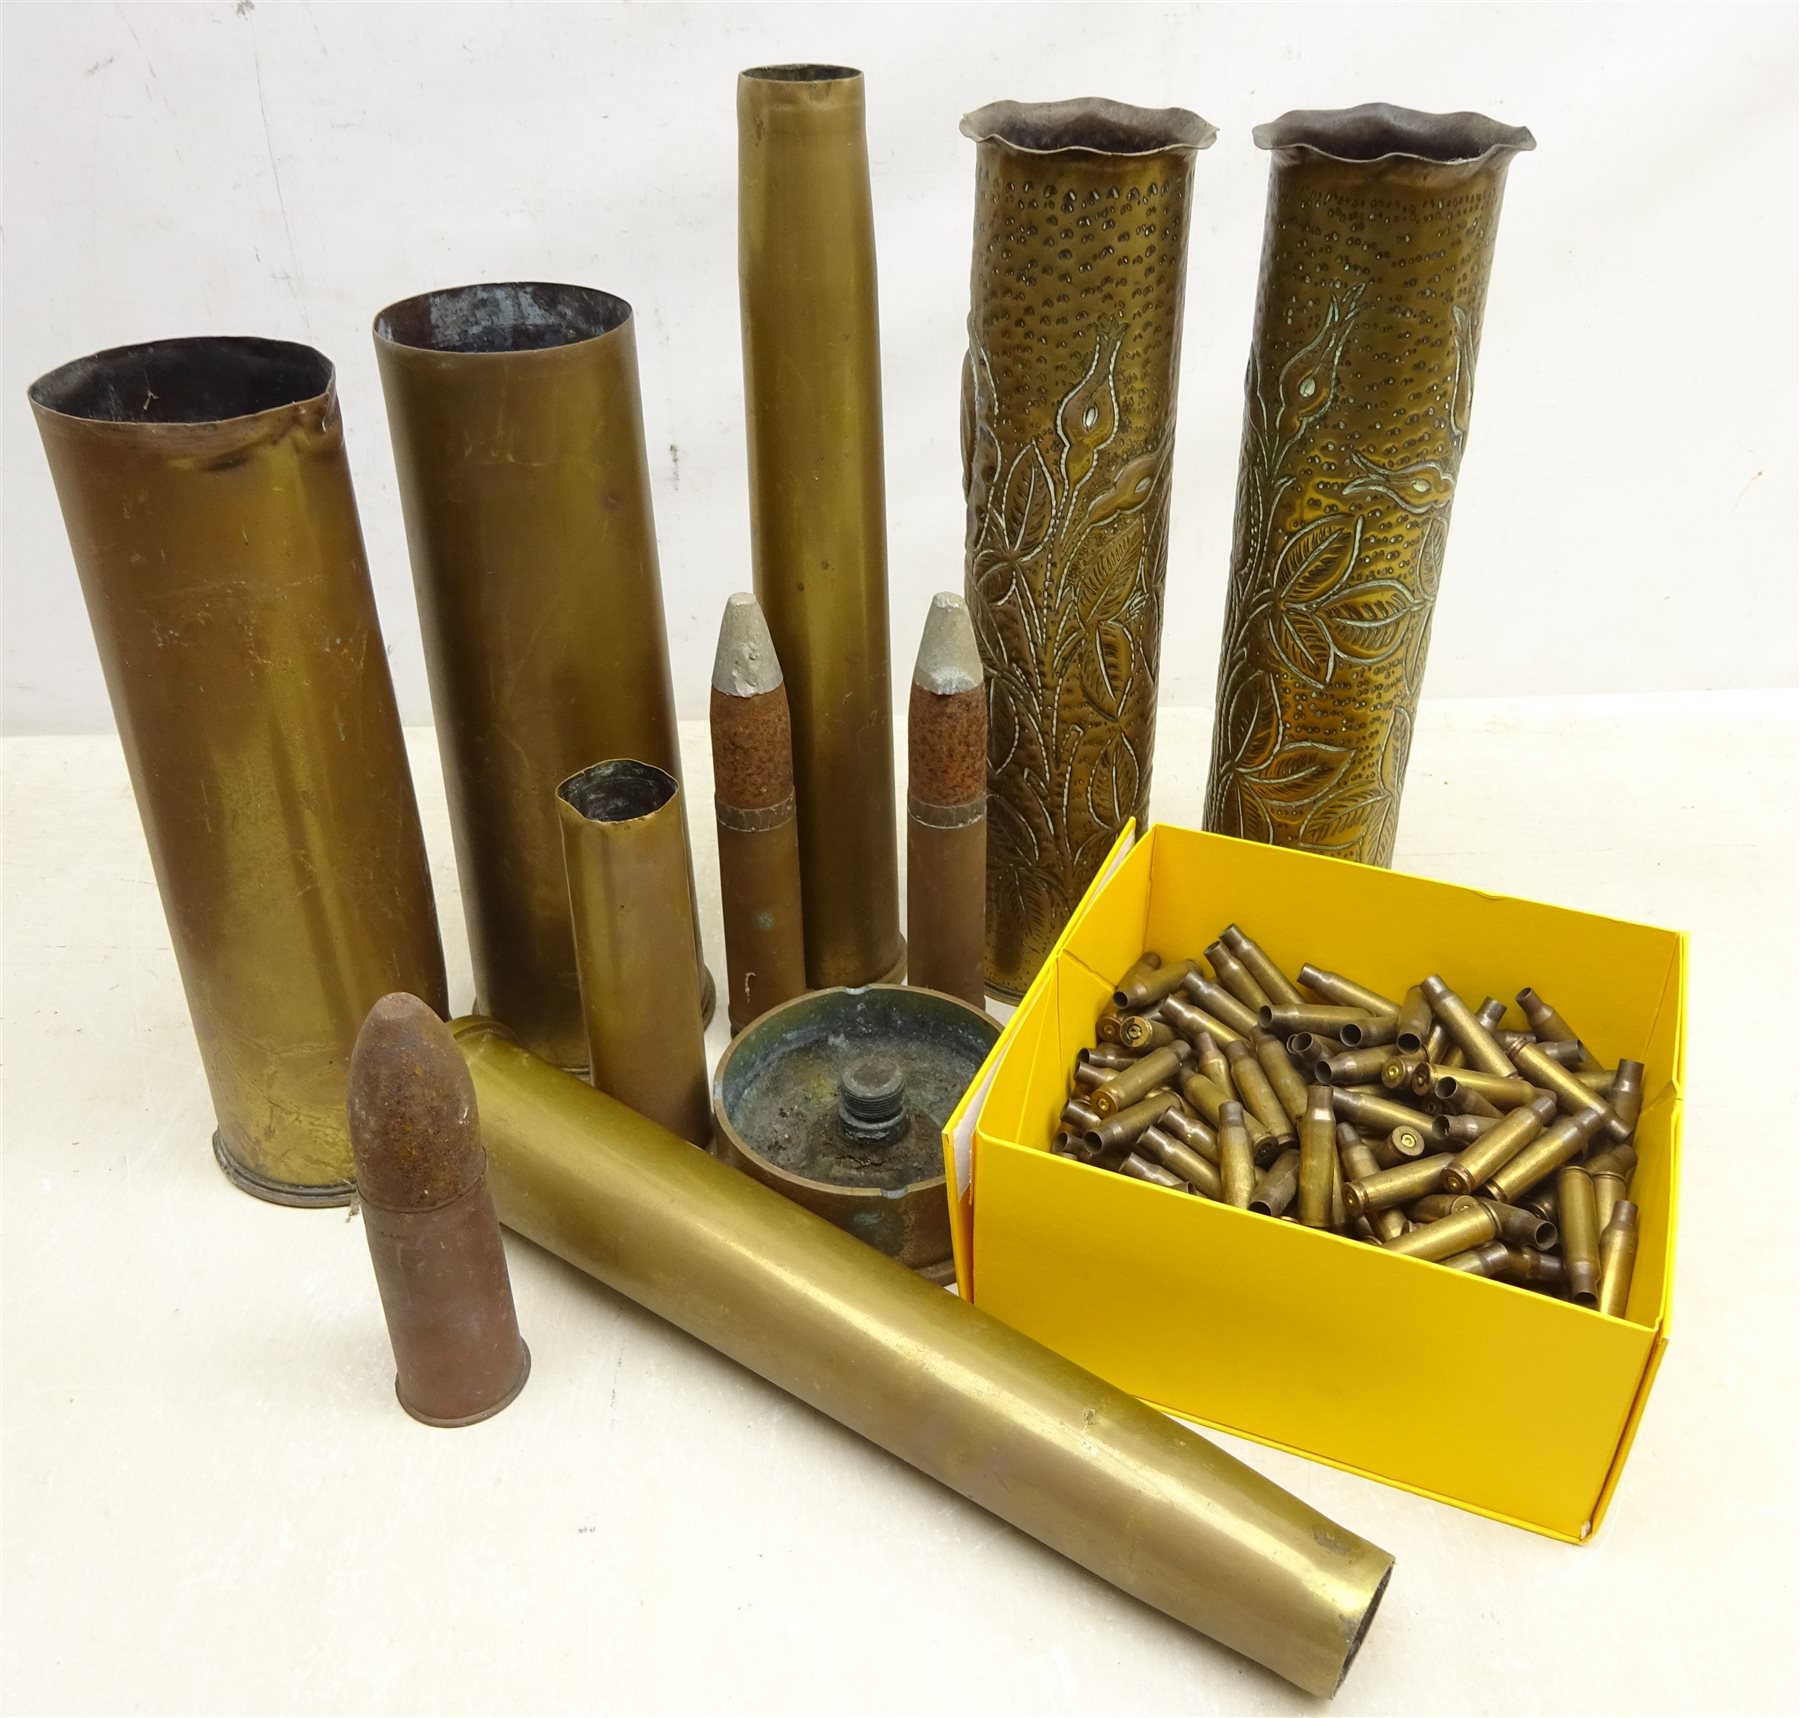 Pair WW1 Trench Art brass artillery shell cases & ashtray, two 30mm Aden  Cannon rounds, other WW1 shell cases and qty of brass cartridge cases -  Decorative Antiques & Collectors Sale